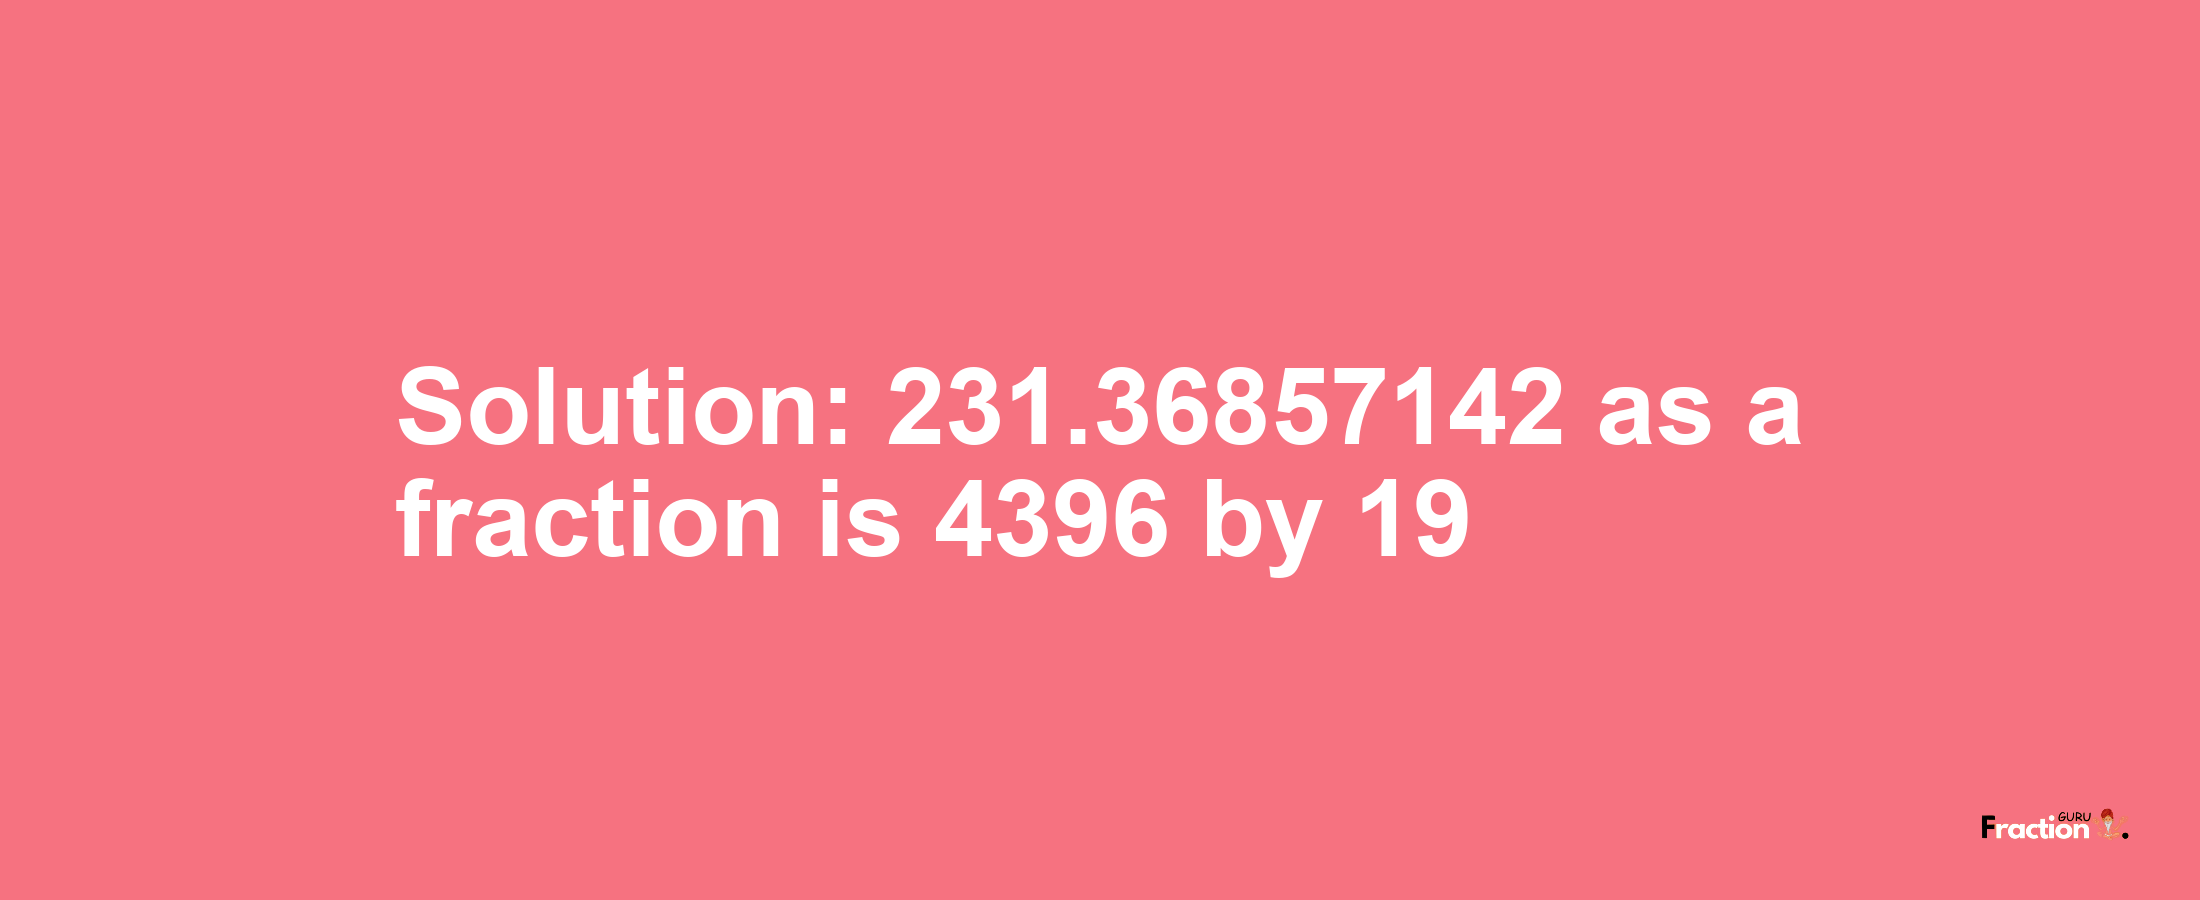 Solution:231.36857142 as a fraction is 4396/19